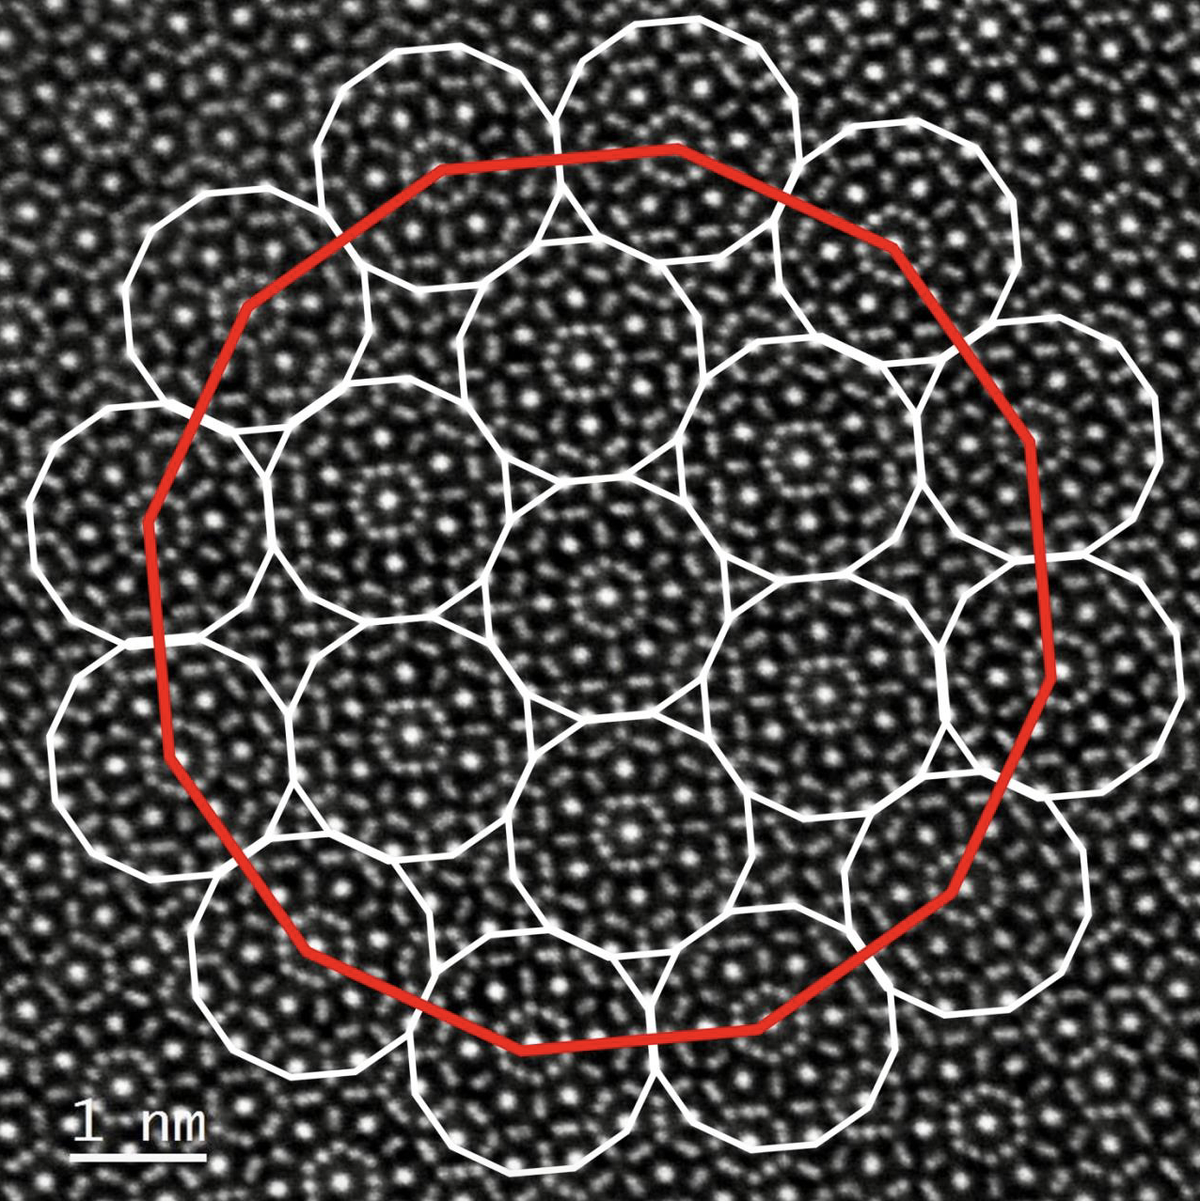 An electron-microscope image of the quasicrystal grain annotated to highlight the 12-fold symmetry.